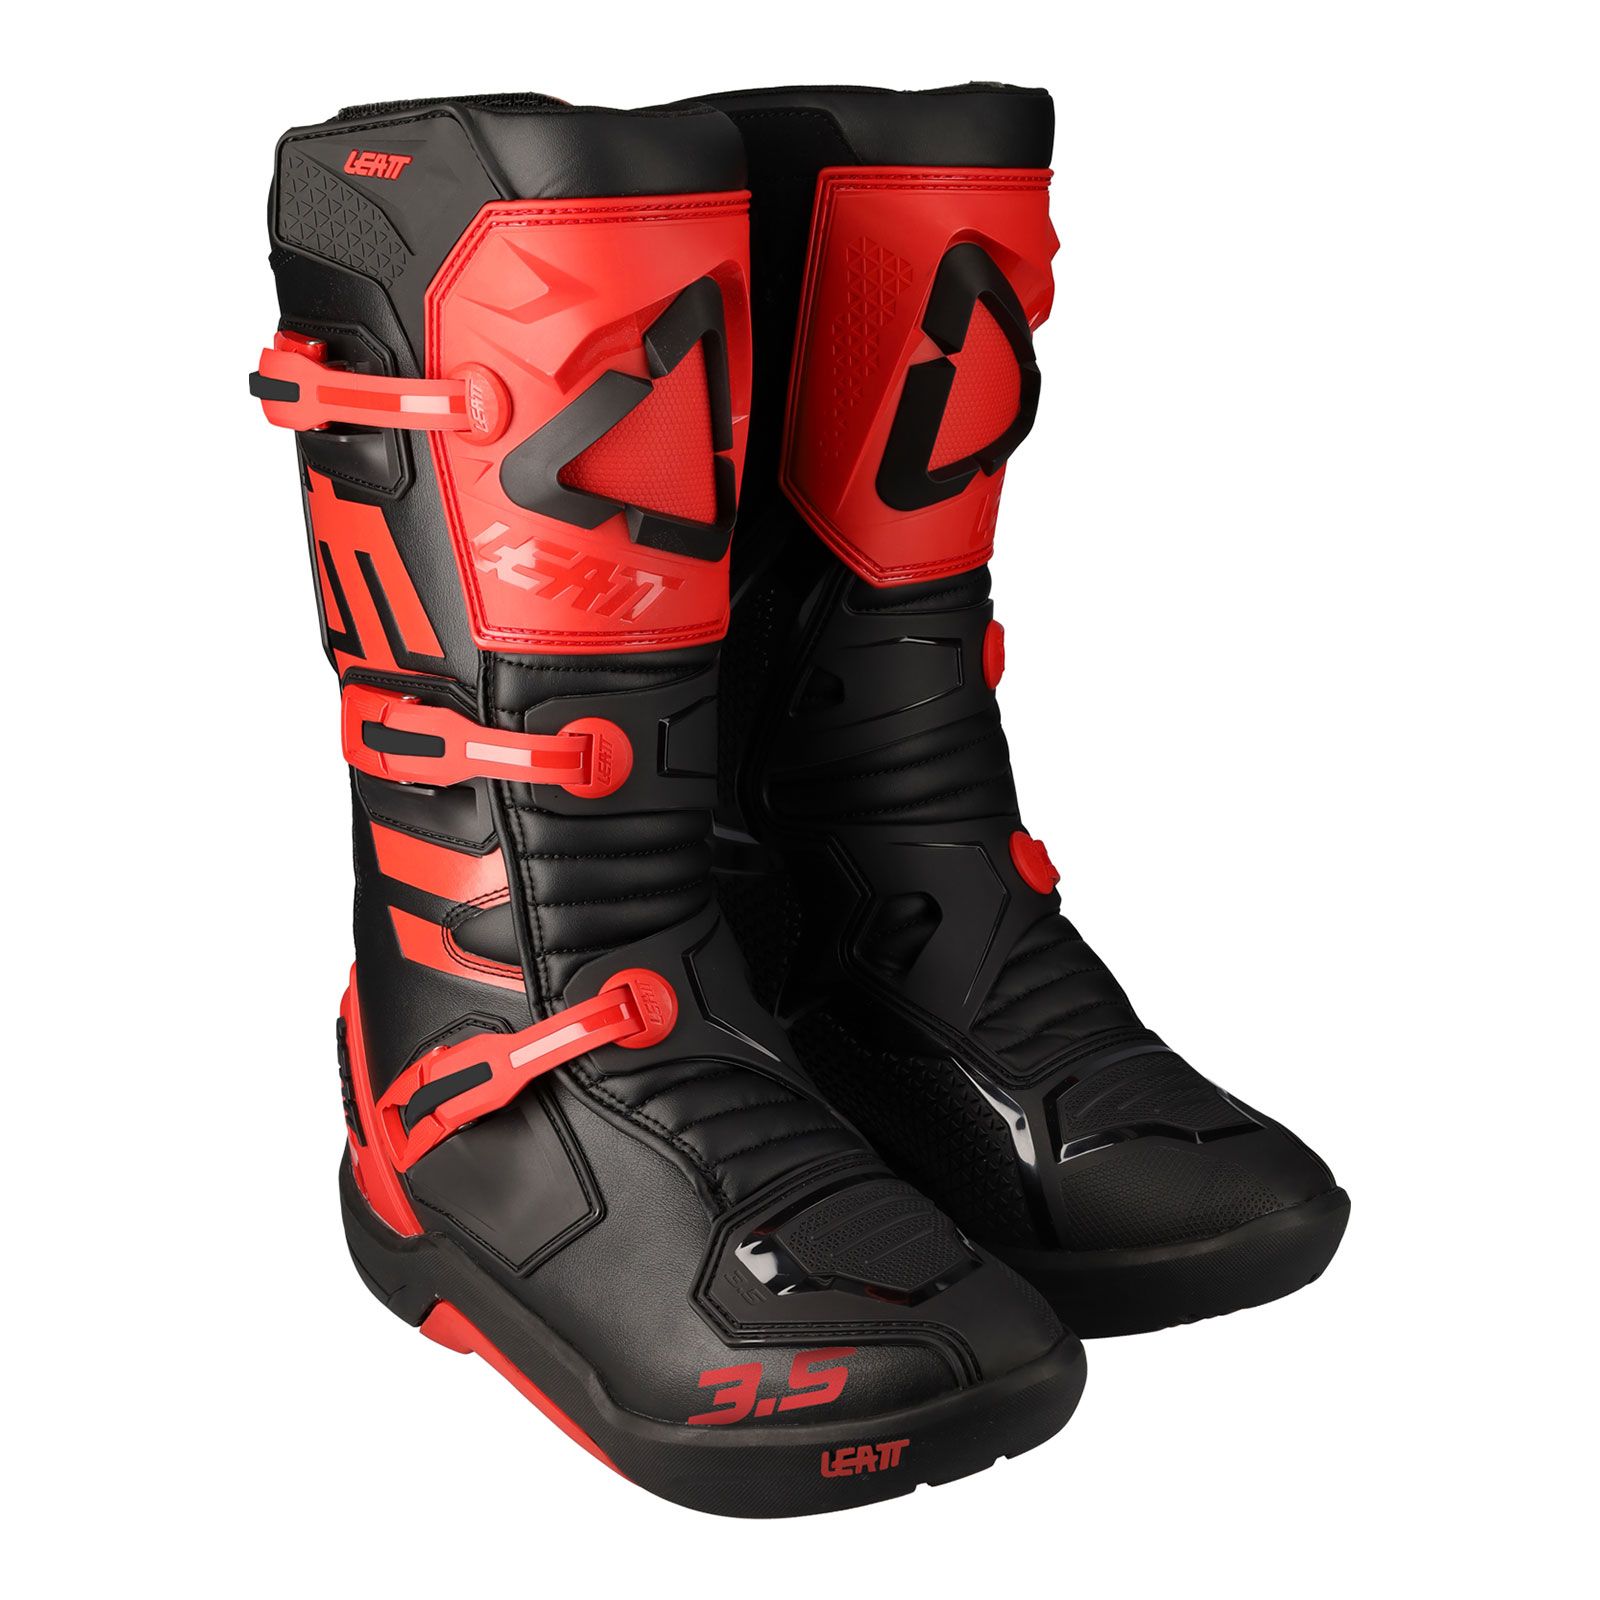 Leatt '22 Boot 3.5 Us7 / Eu40.5 Red/Blk | Tracktion Motorcycles